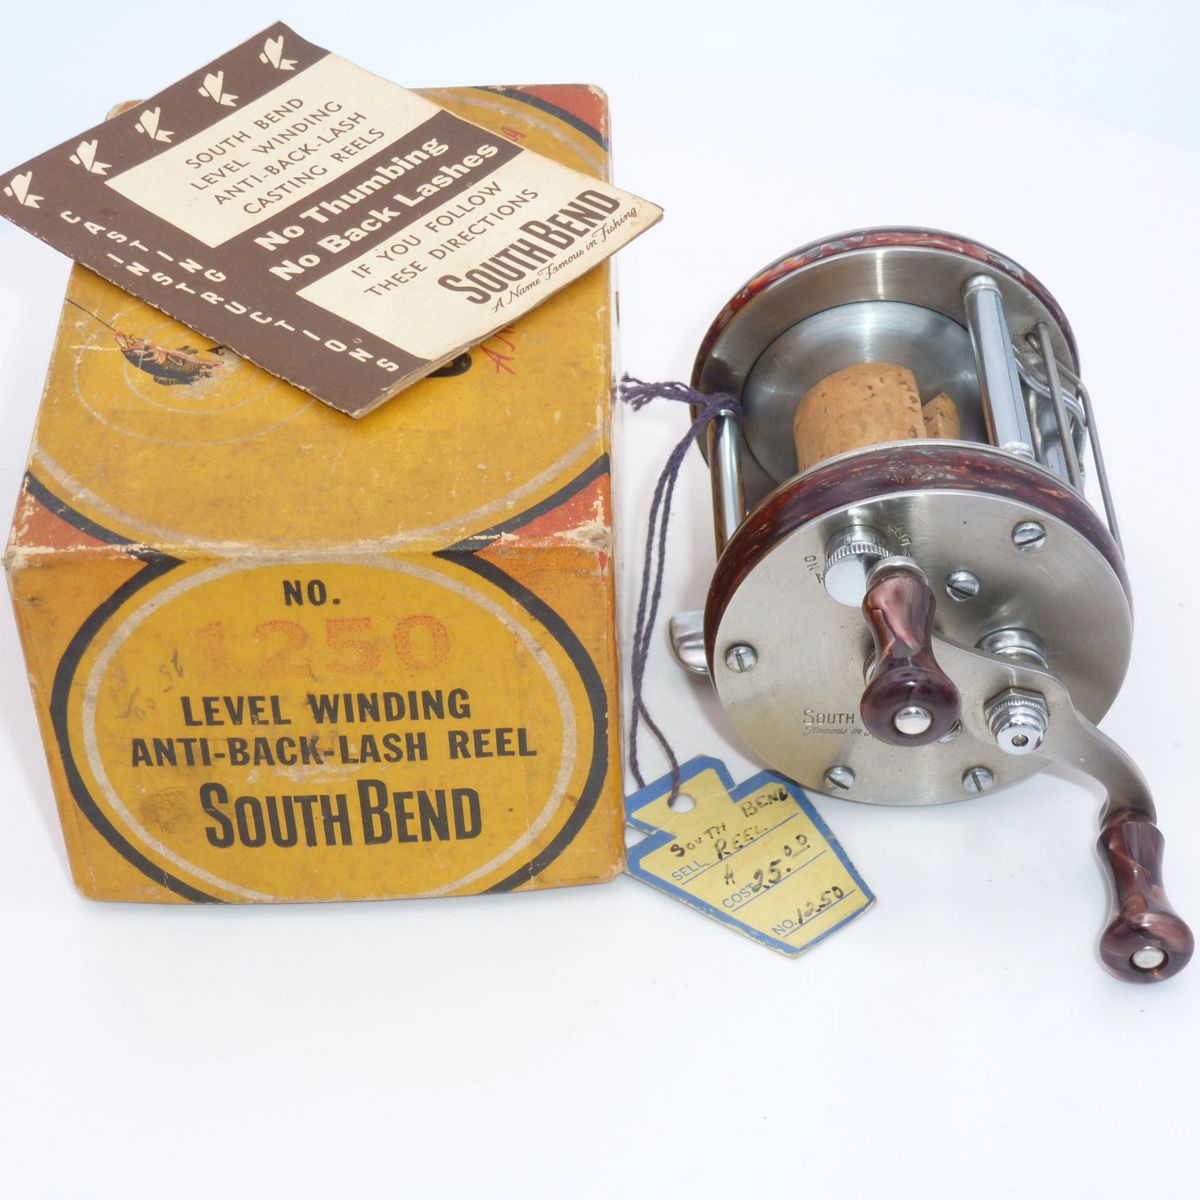 SOUTH BEND - South Bend, In. - Antique Fishing Reels